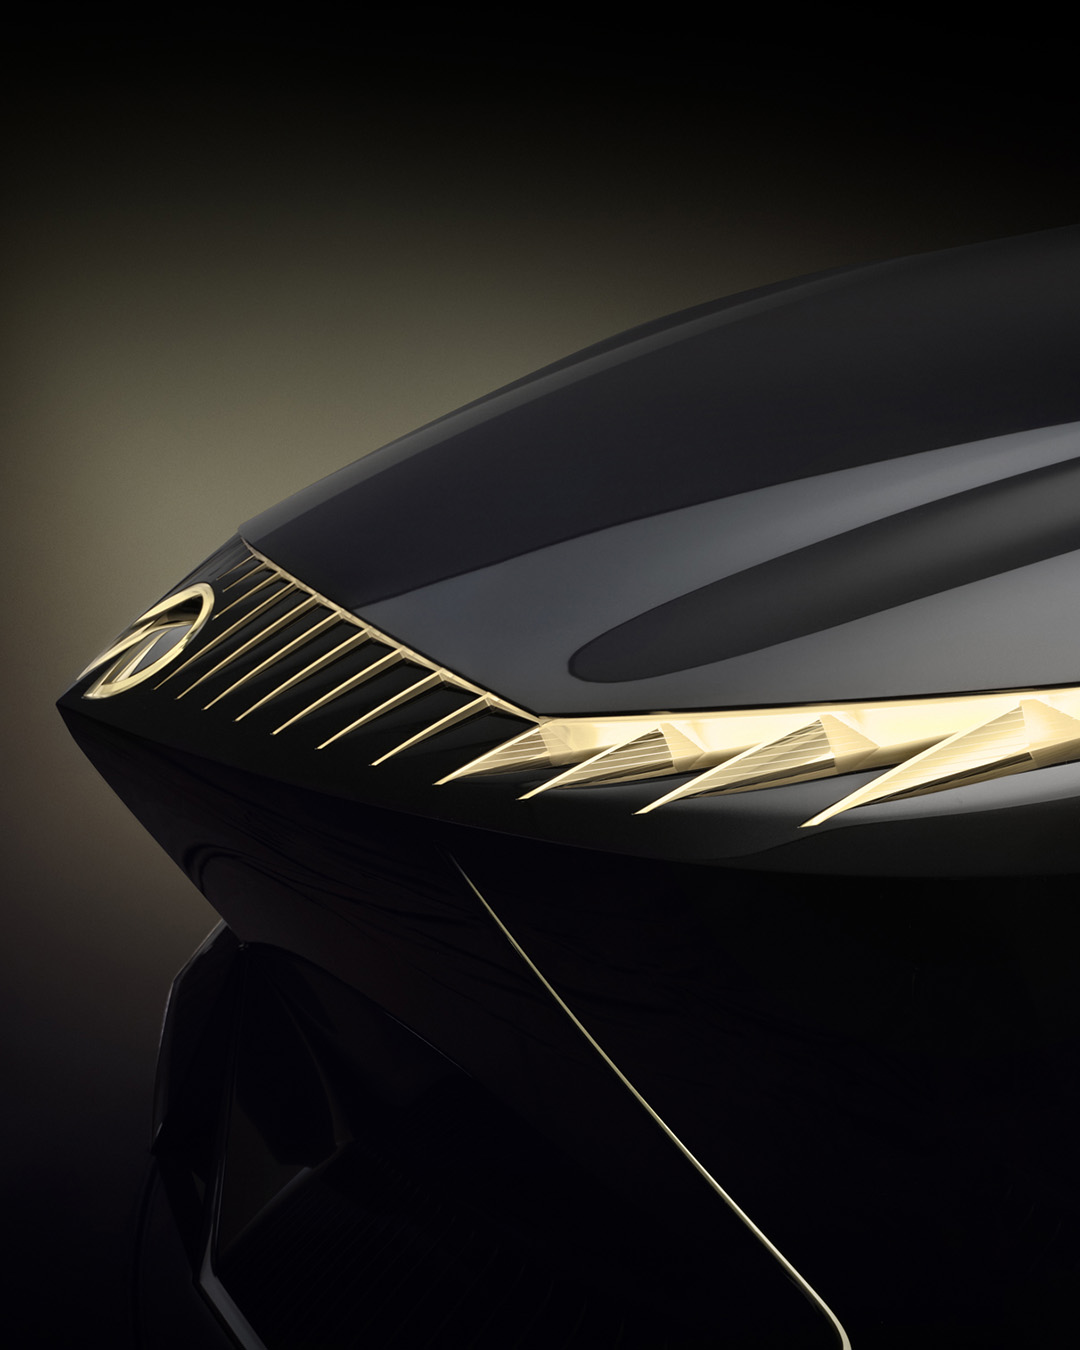 Angled view of the INFINITI Vision Qe electric car’s hood